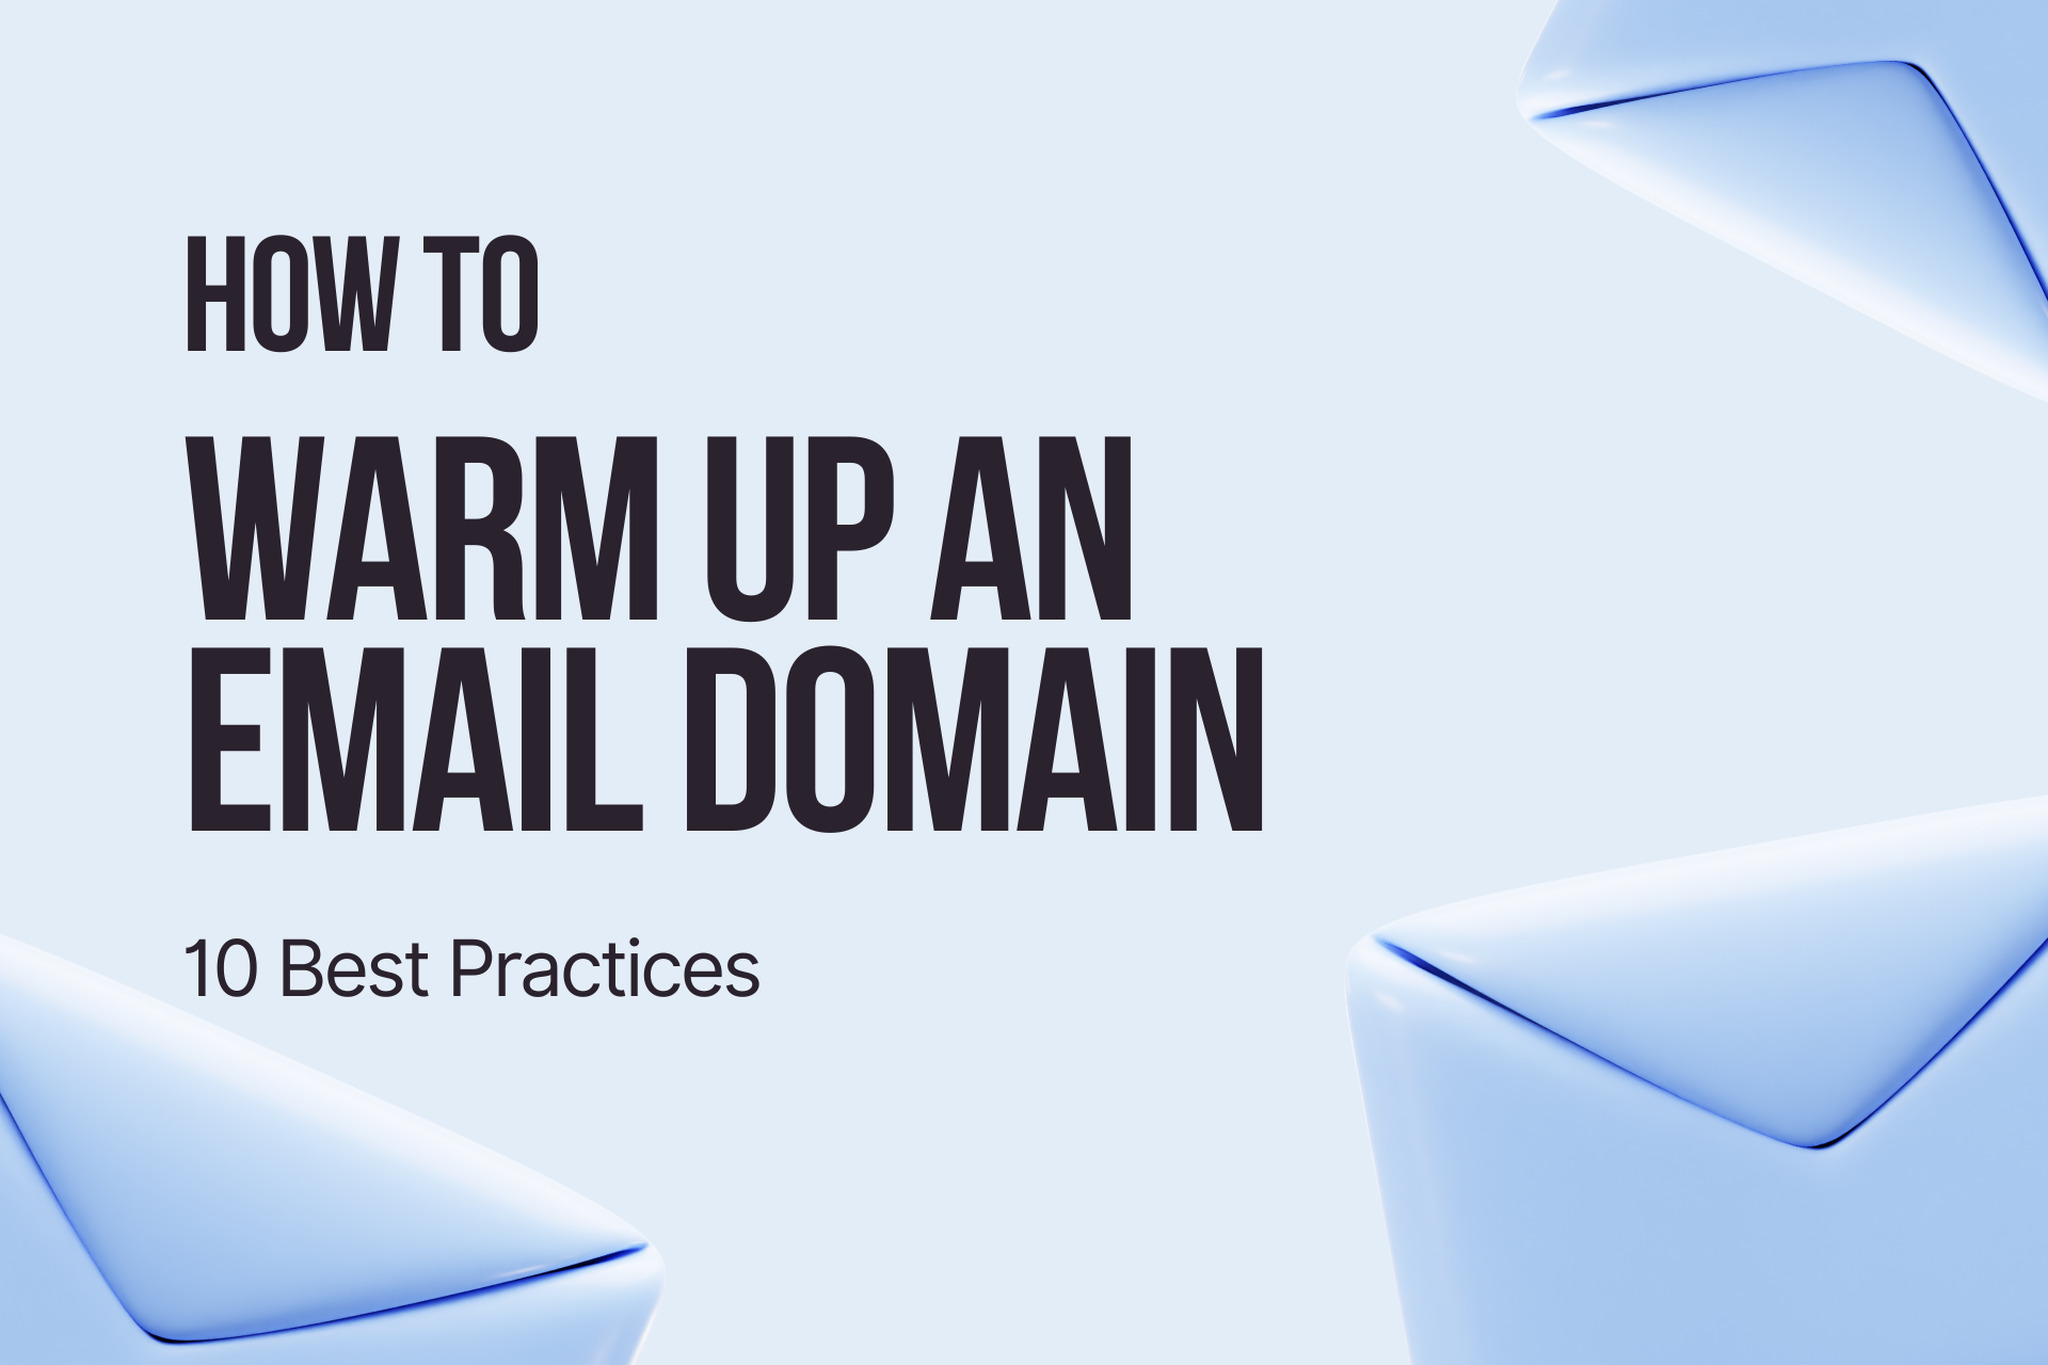 How to Warm Up an Email Domain (10 Best Practices)